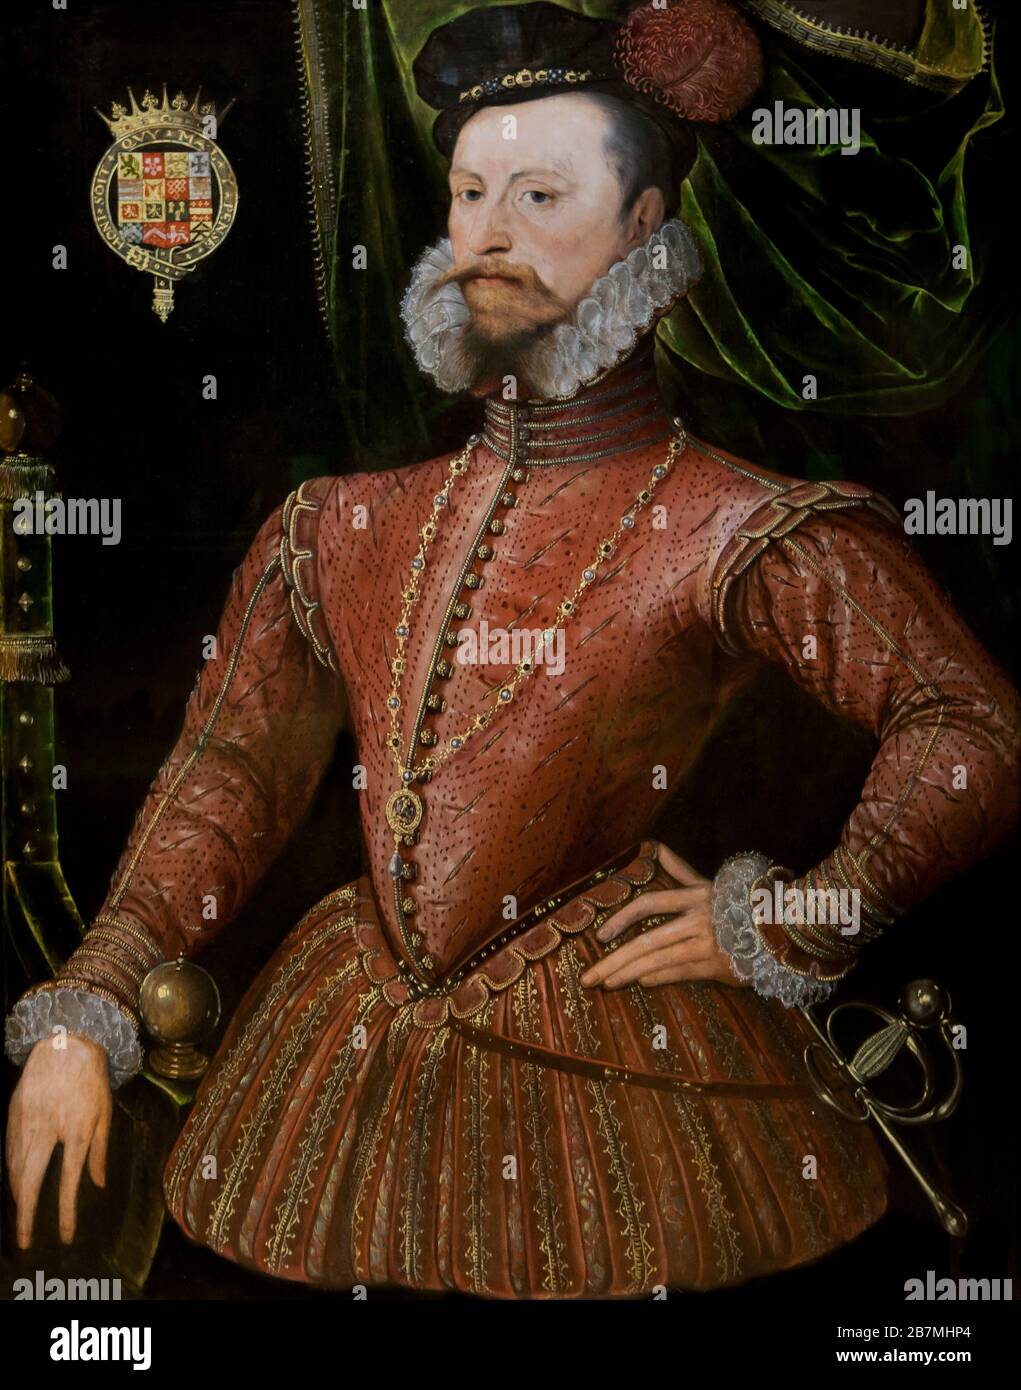 Robert Dudley, Ist Earl of Leicester, unknown artist, circa 1575, Stock Photo